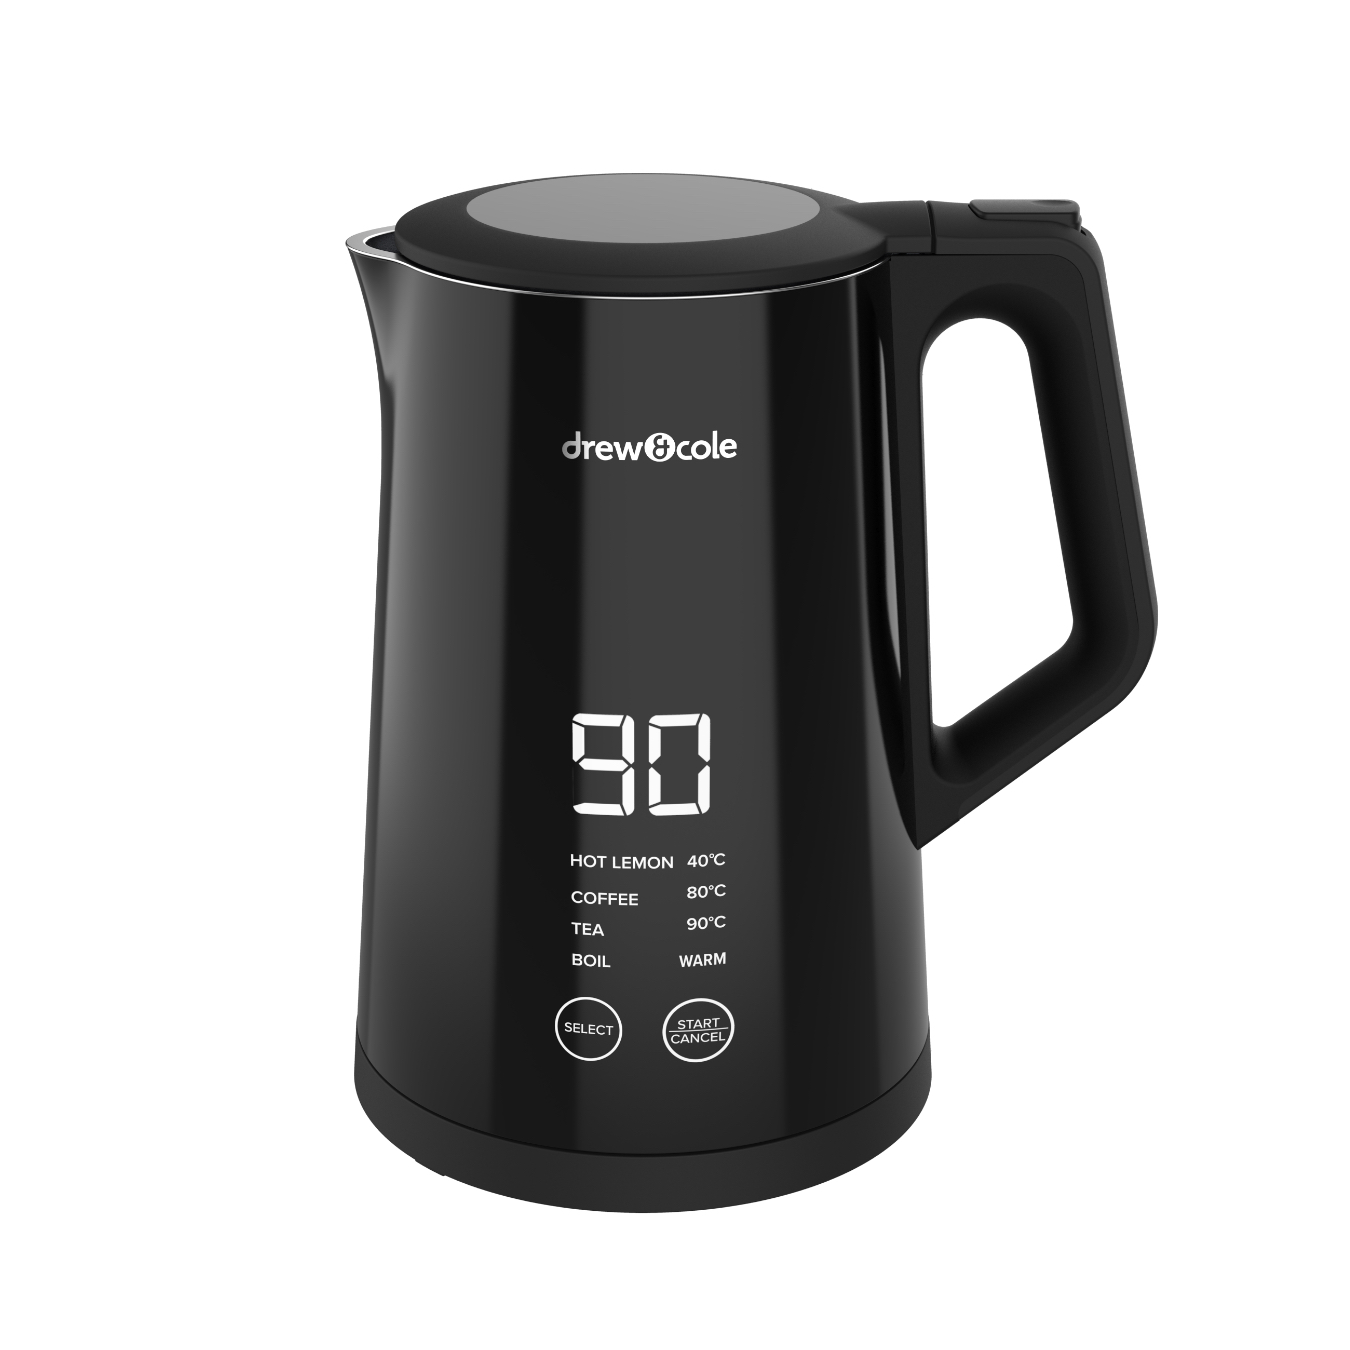 View Digital Kettle Pro by DrewCole information